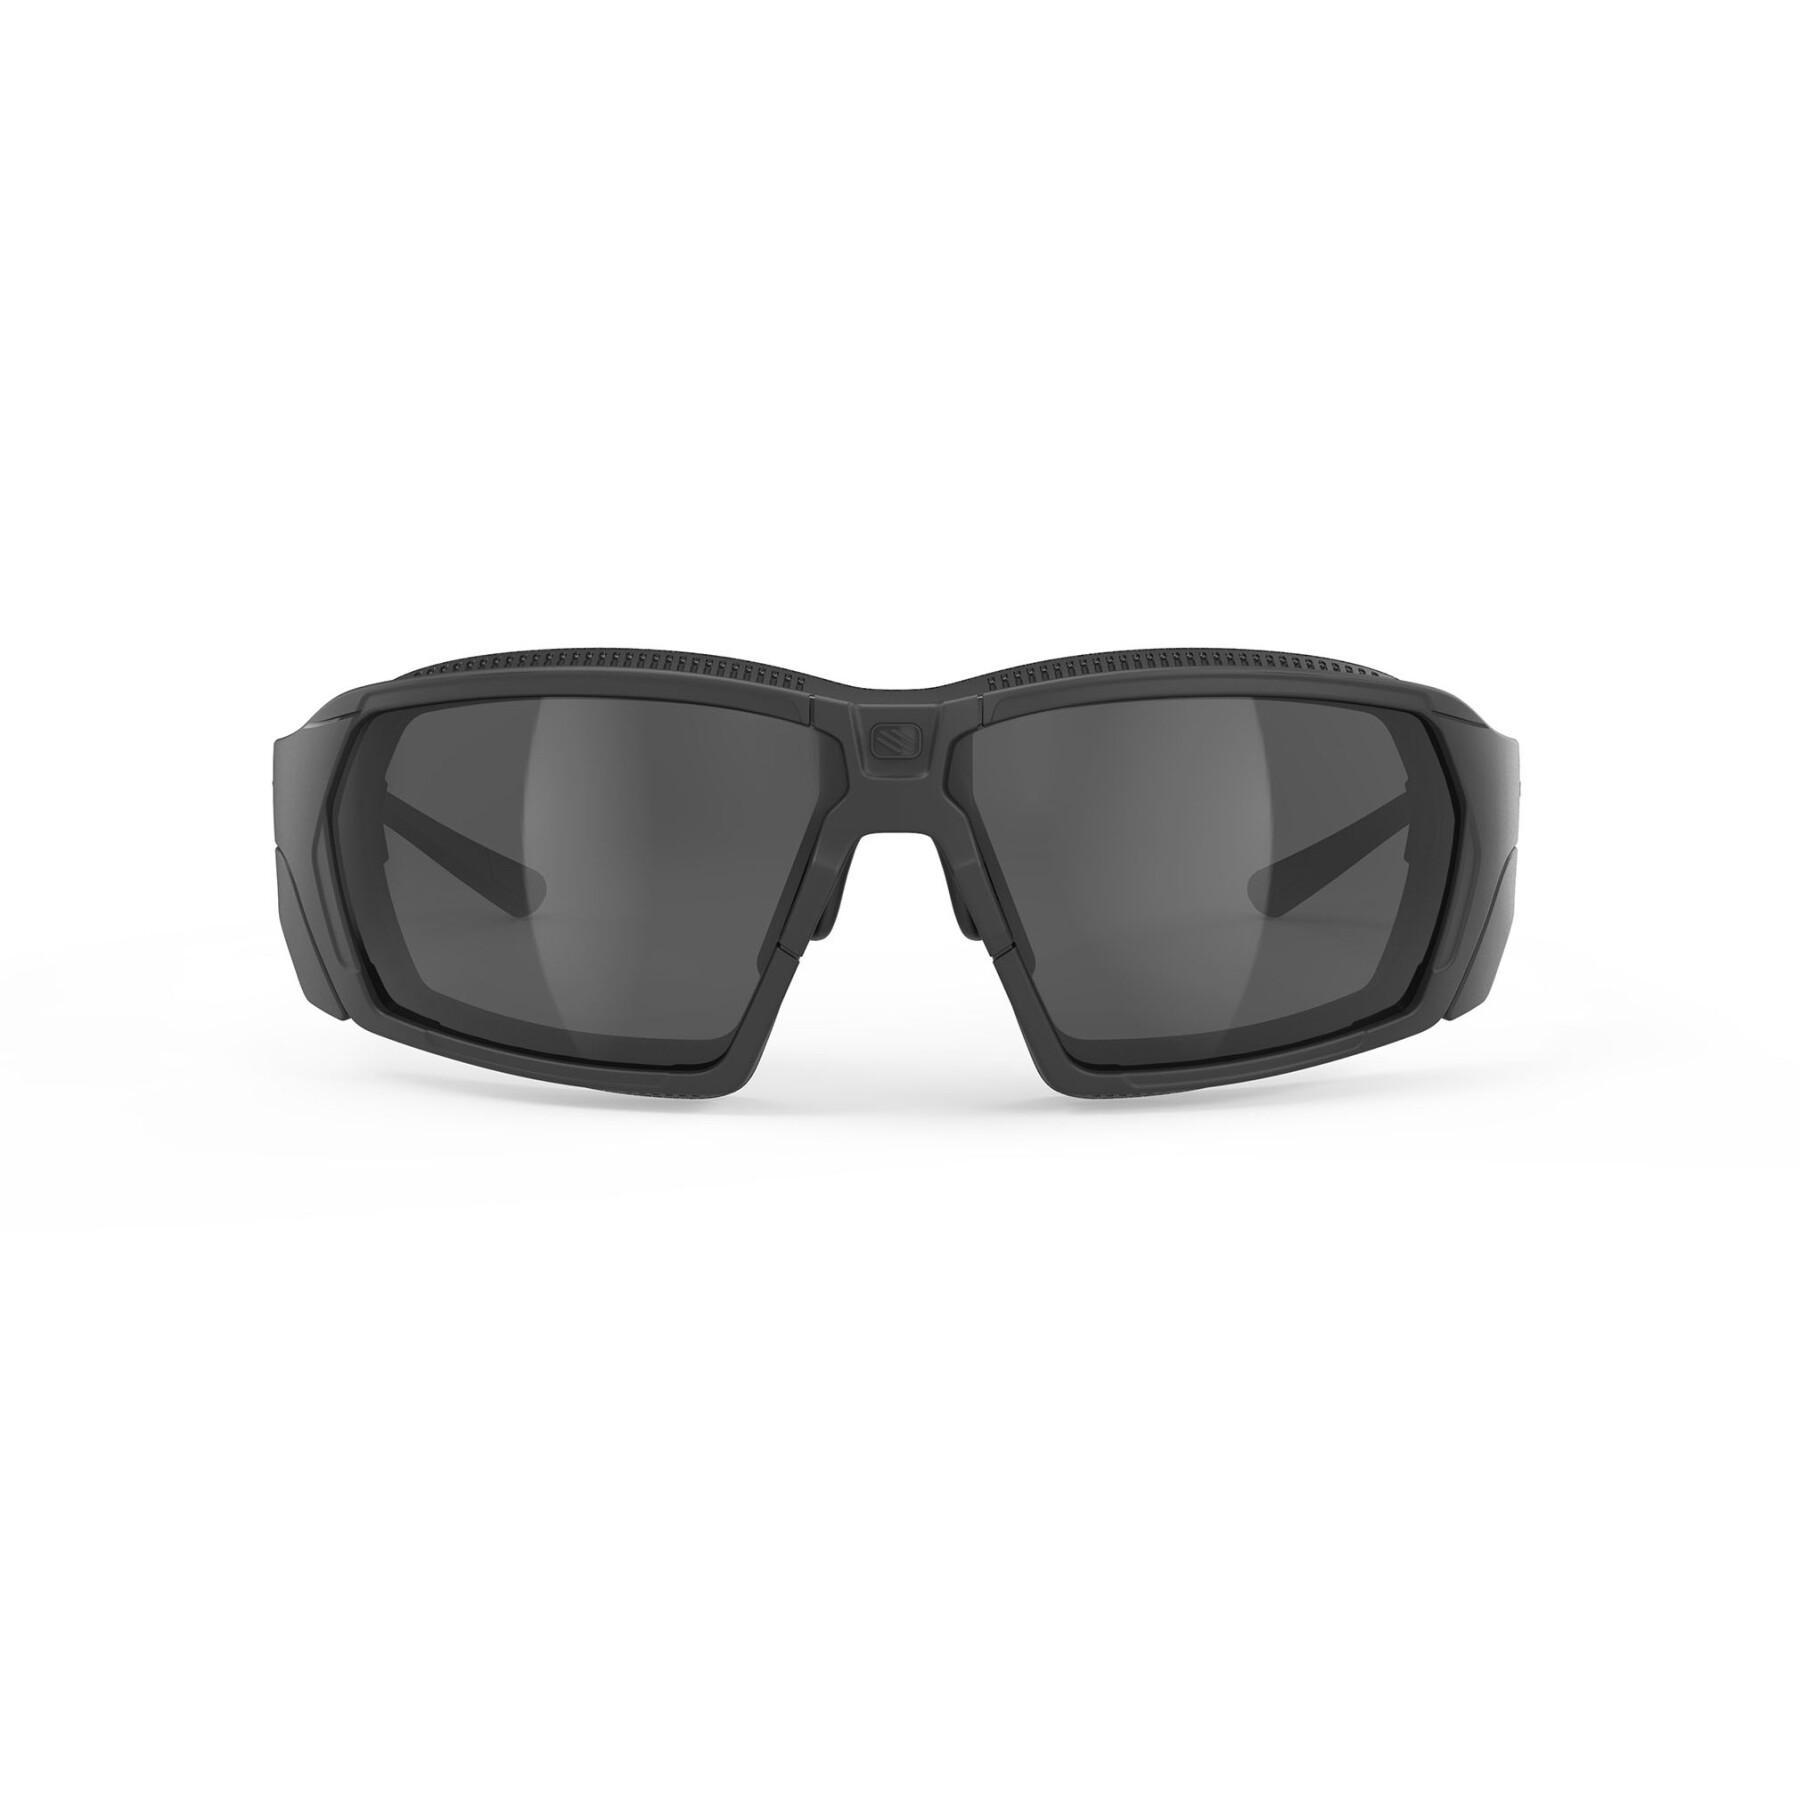 Performance eyewear Rudy Project Agent Q Stealth